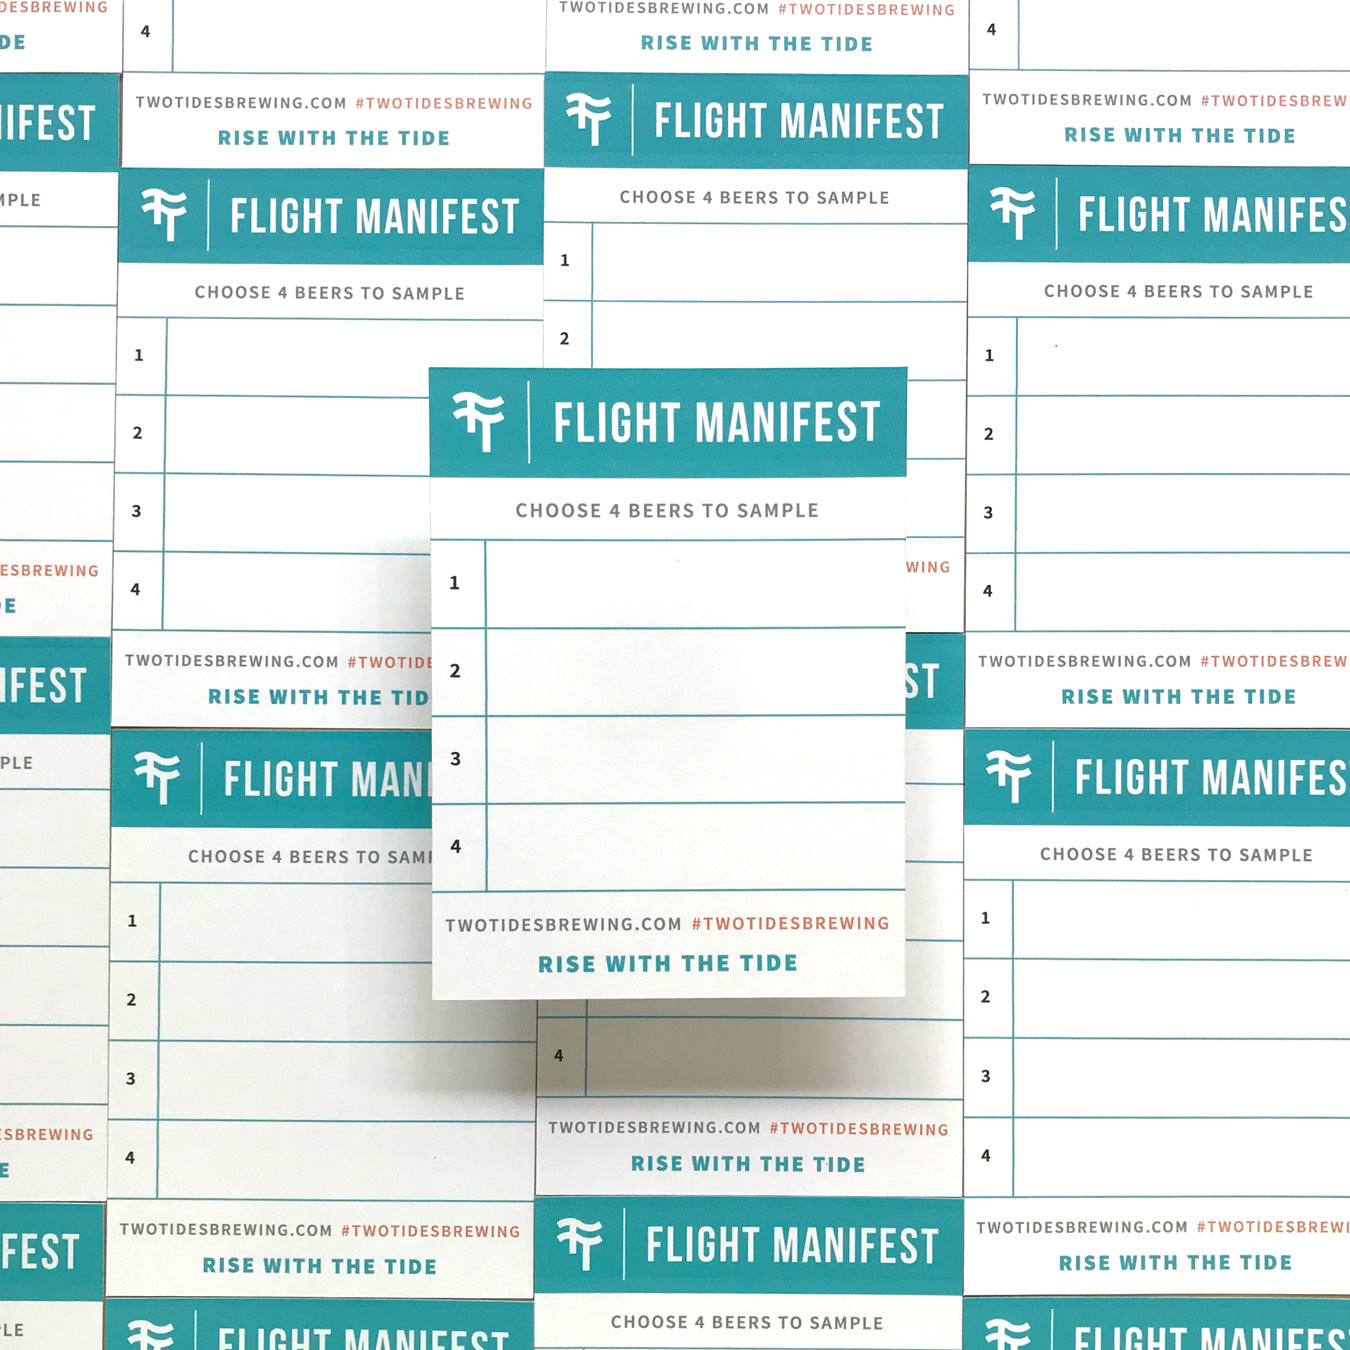 A photograph of the flight manifest that you would use to select your flight choices.